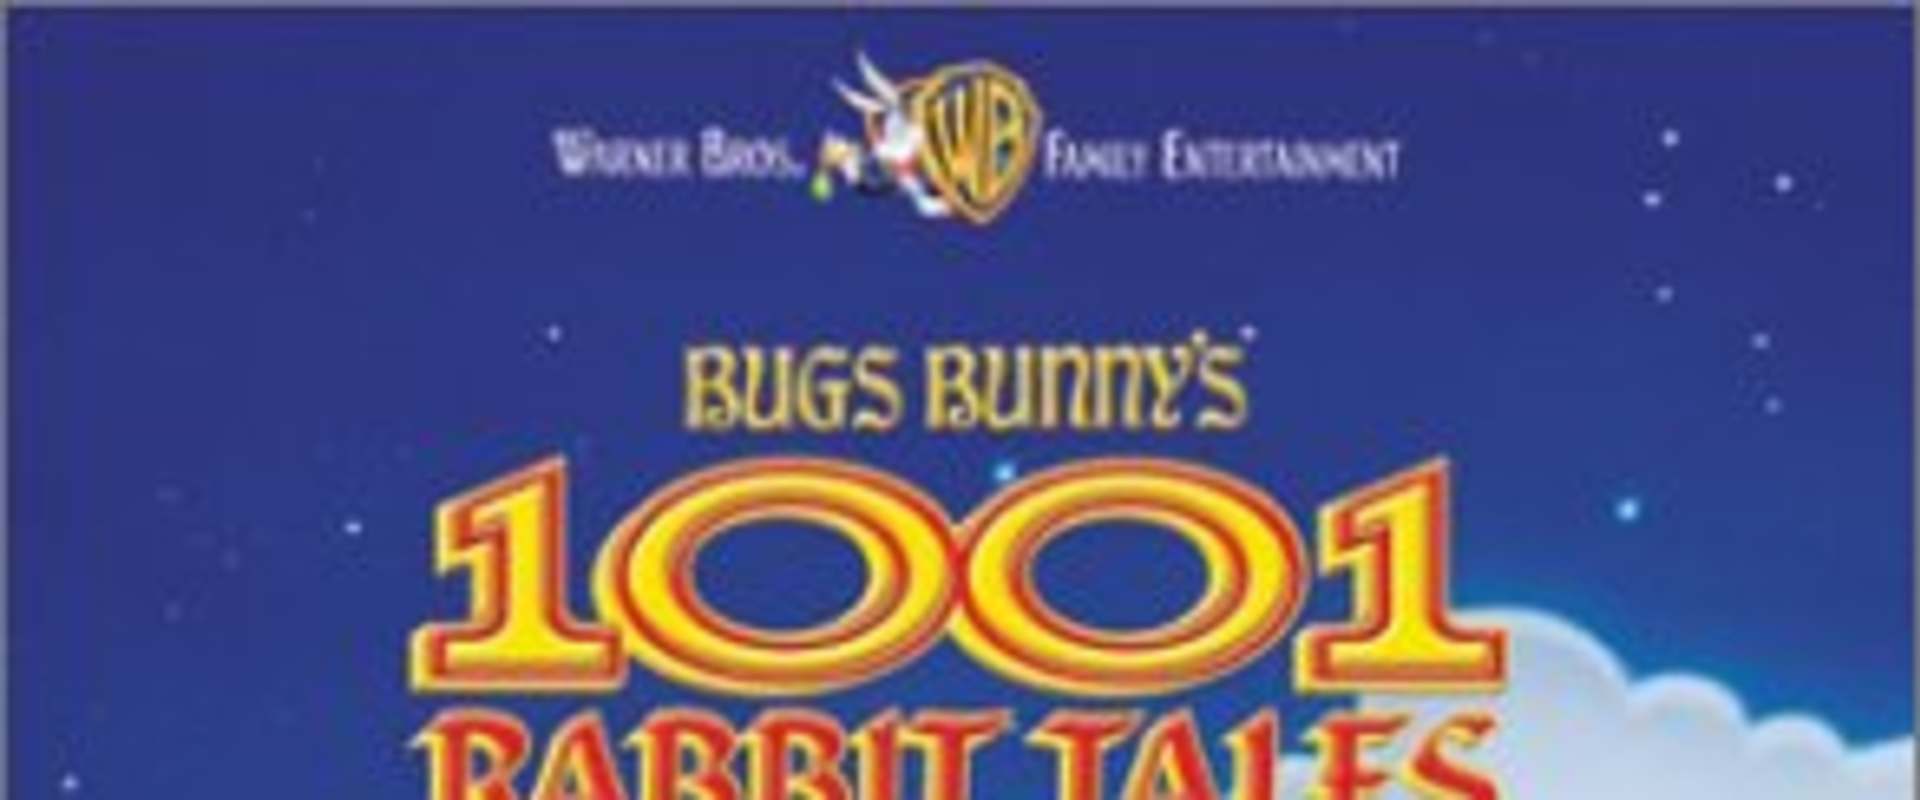 Bugs Bunny's 3rd Movie: 1001 Rabbit Tales background 1